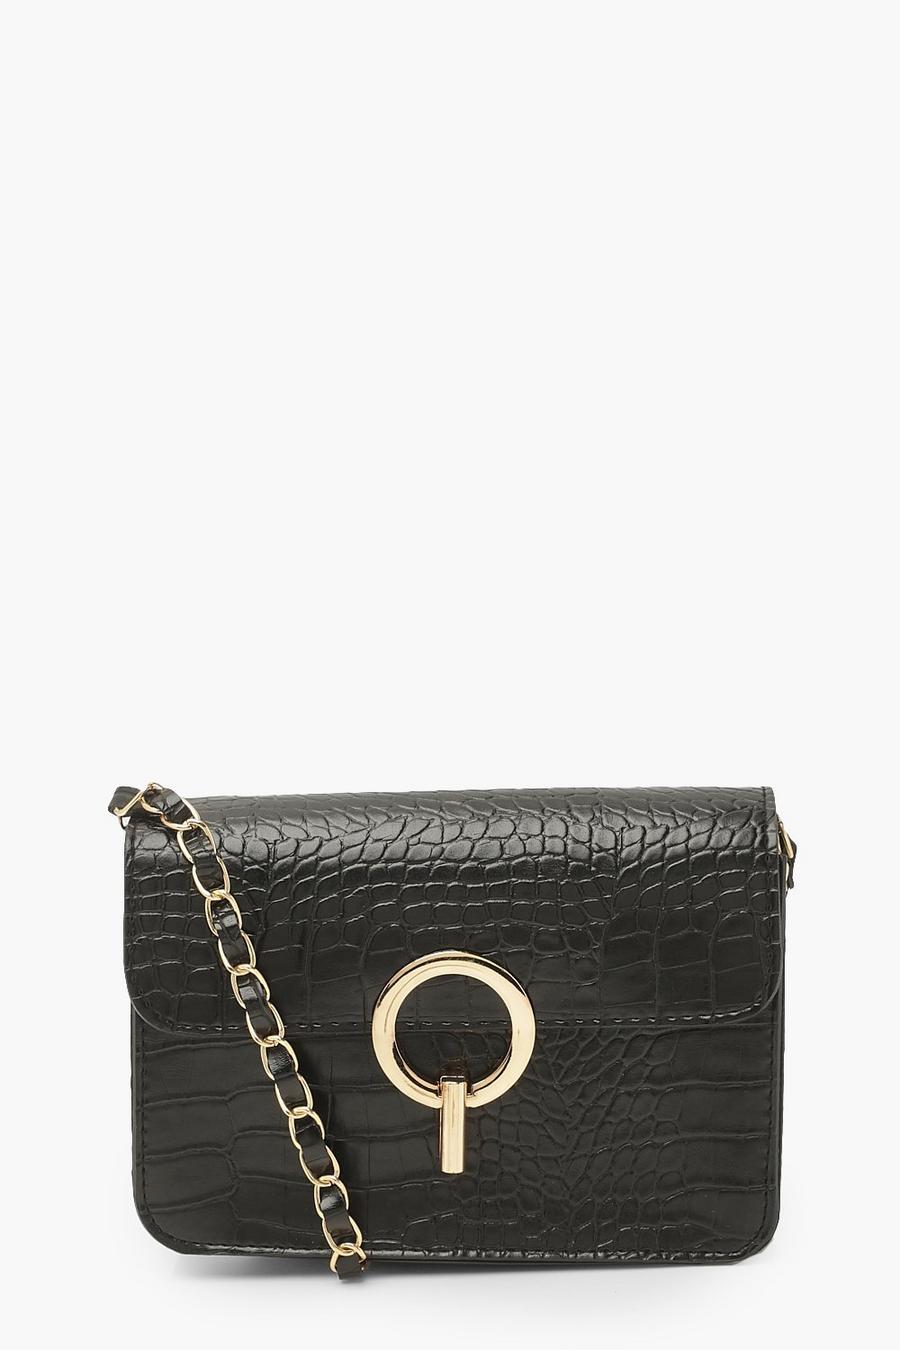 Black Croc Leather And Chain Strap Cross Body Bag image number 1